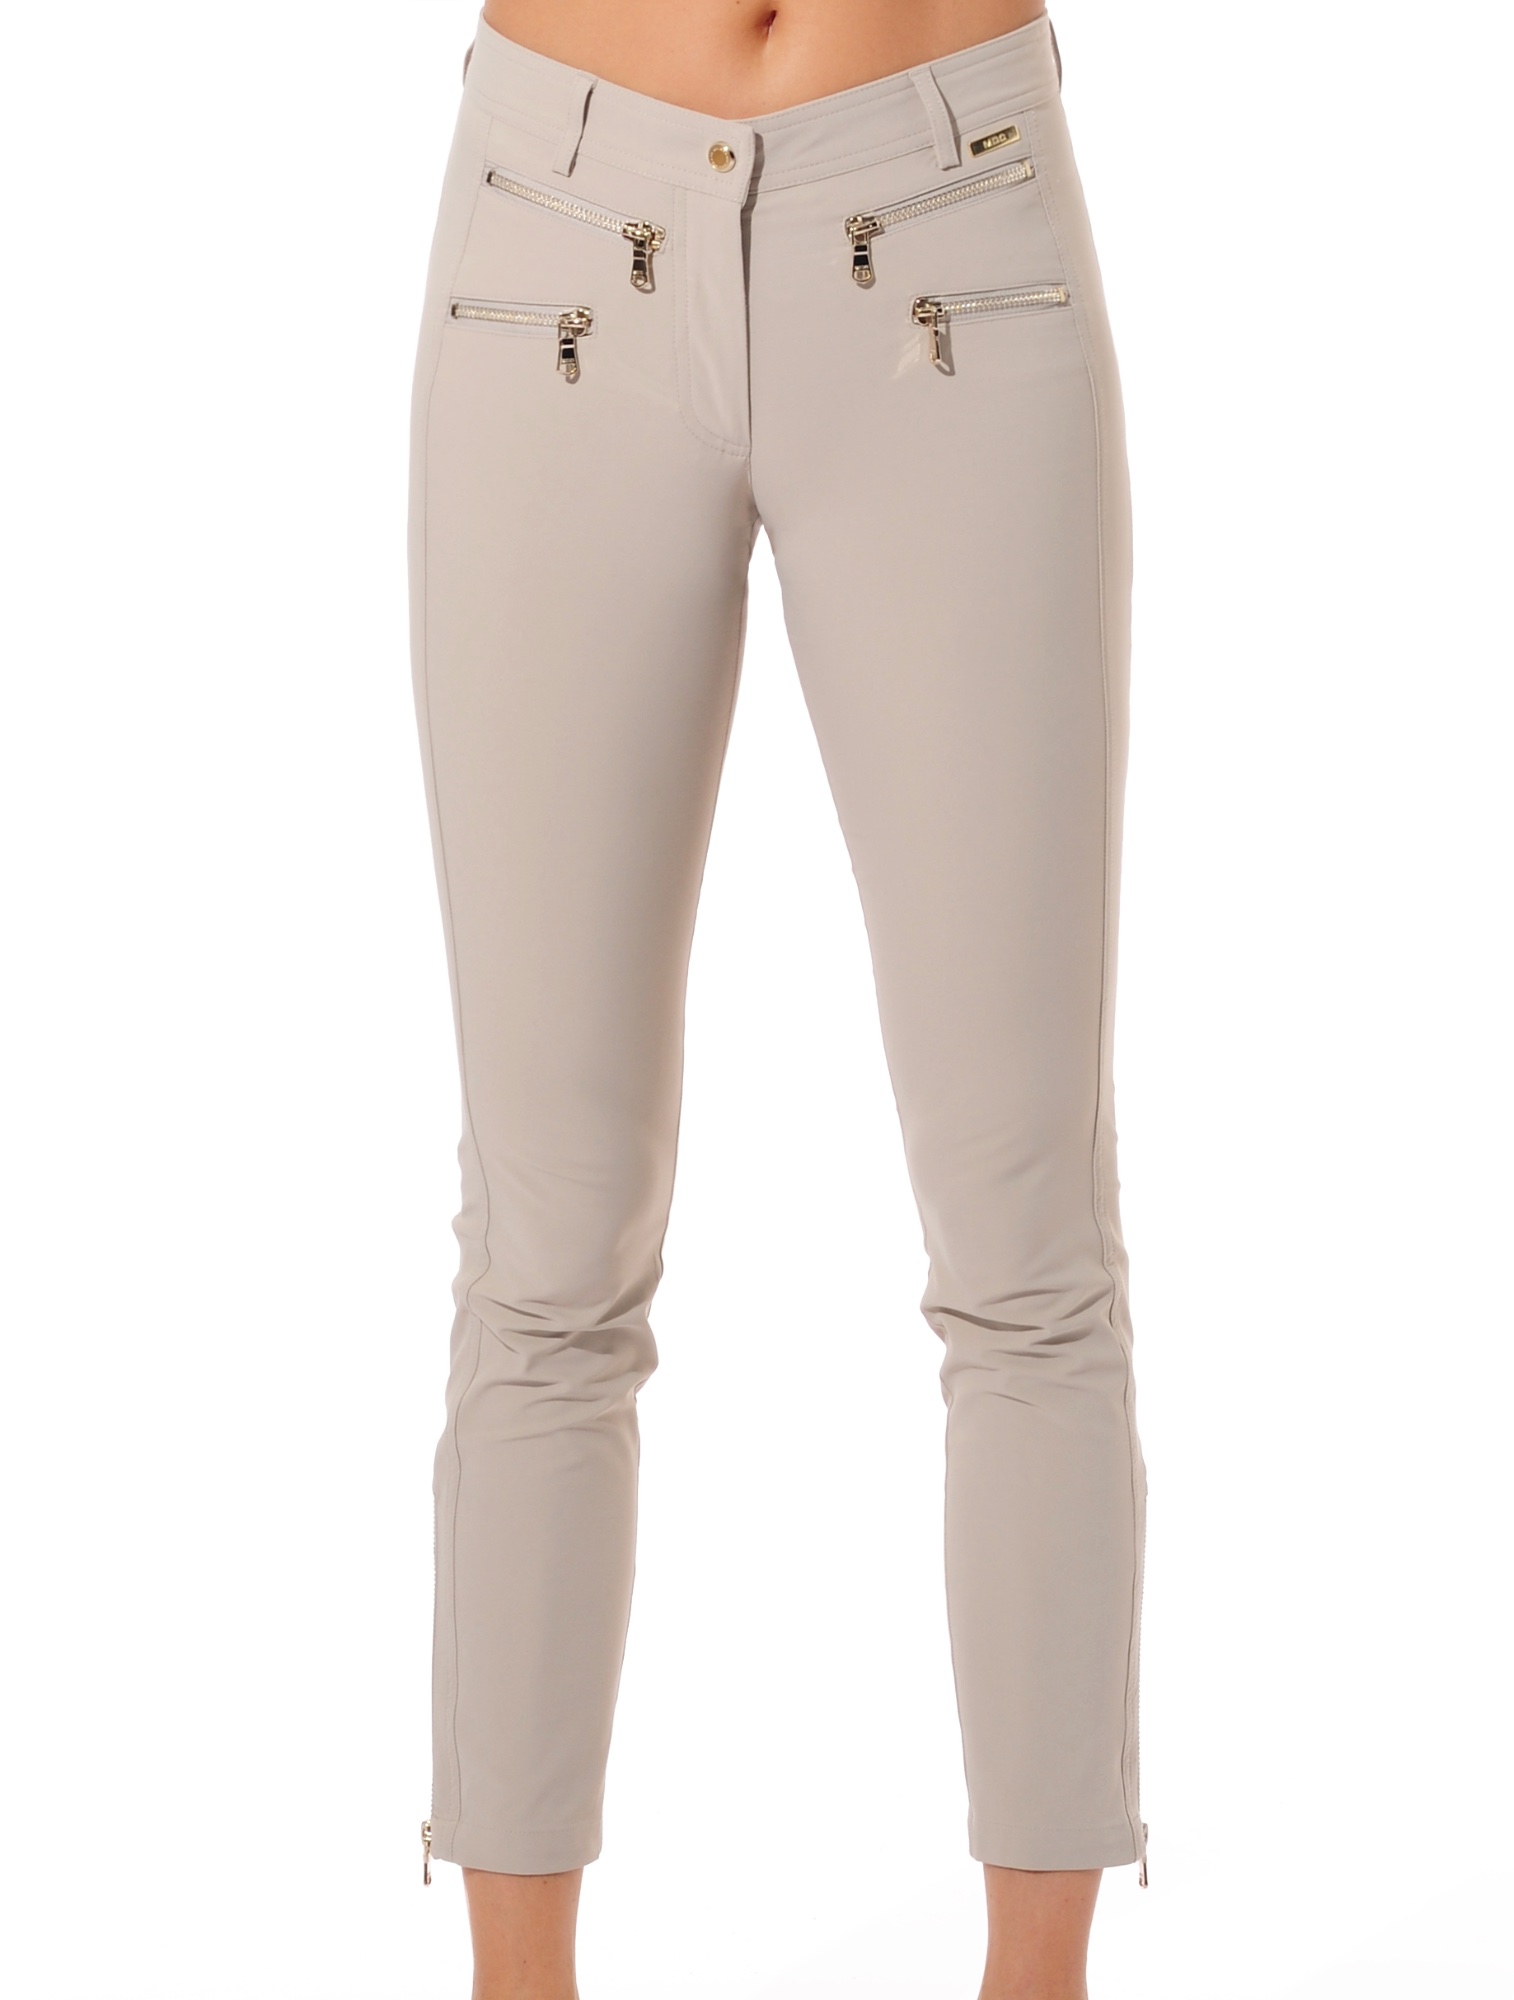 4way stretch double zip ankle pants light taupe 